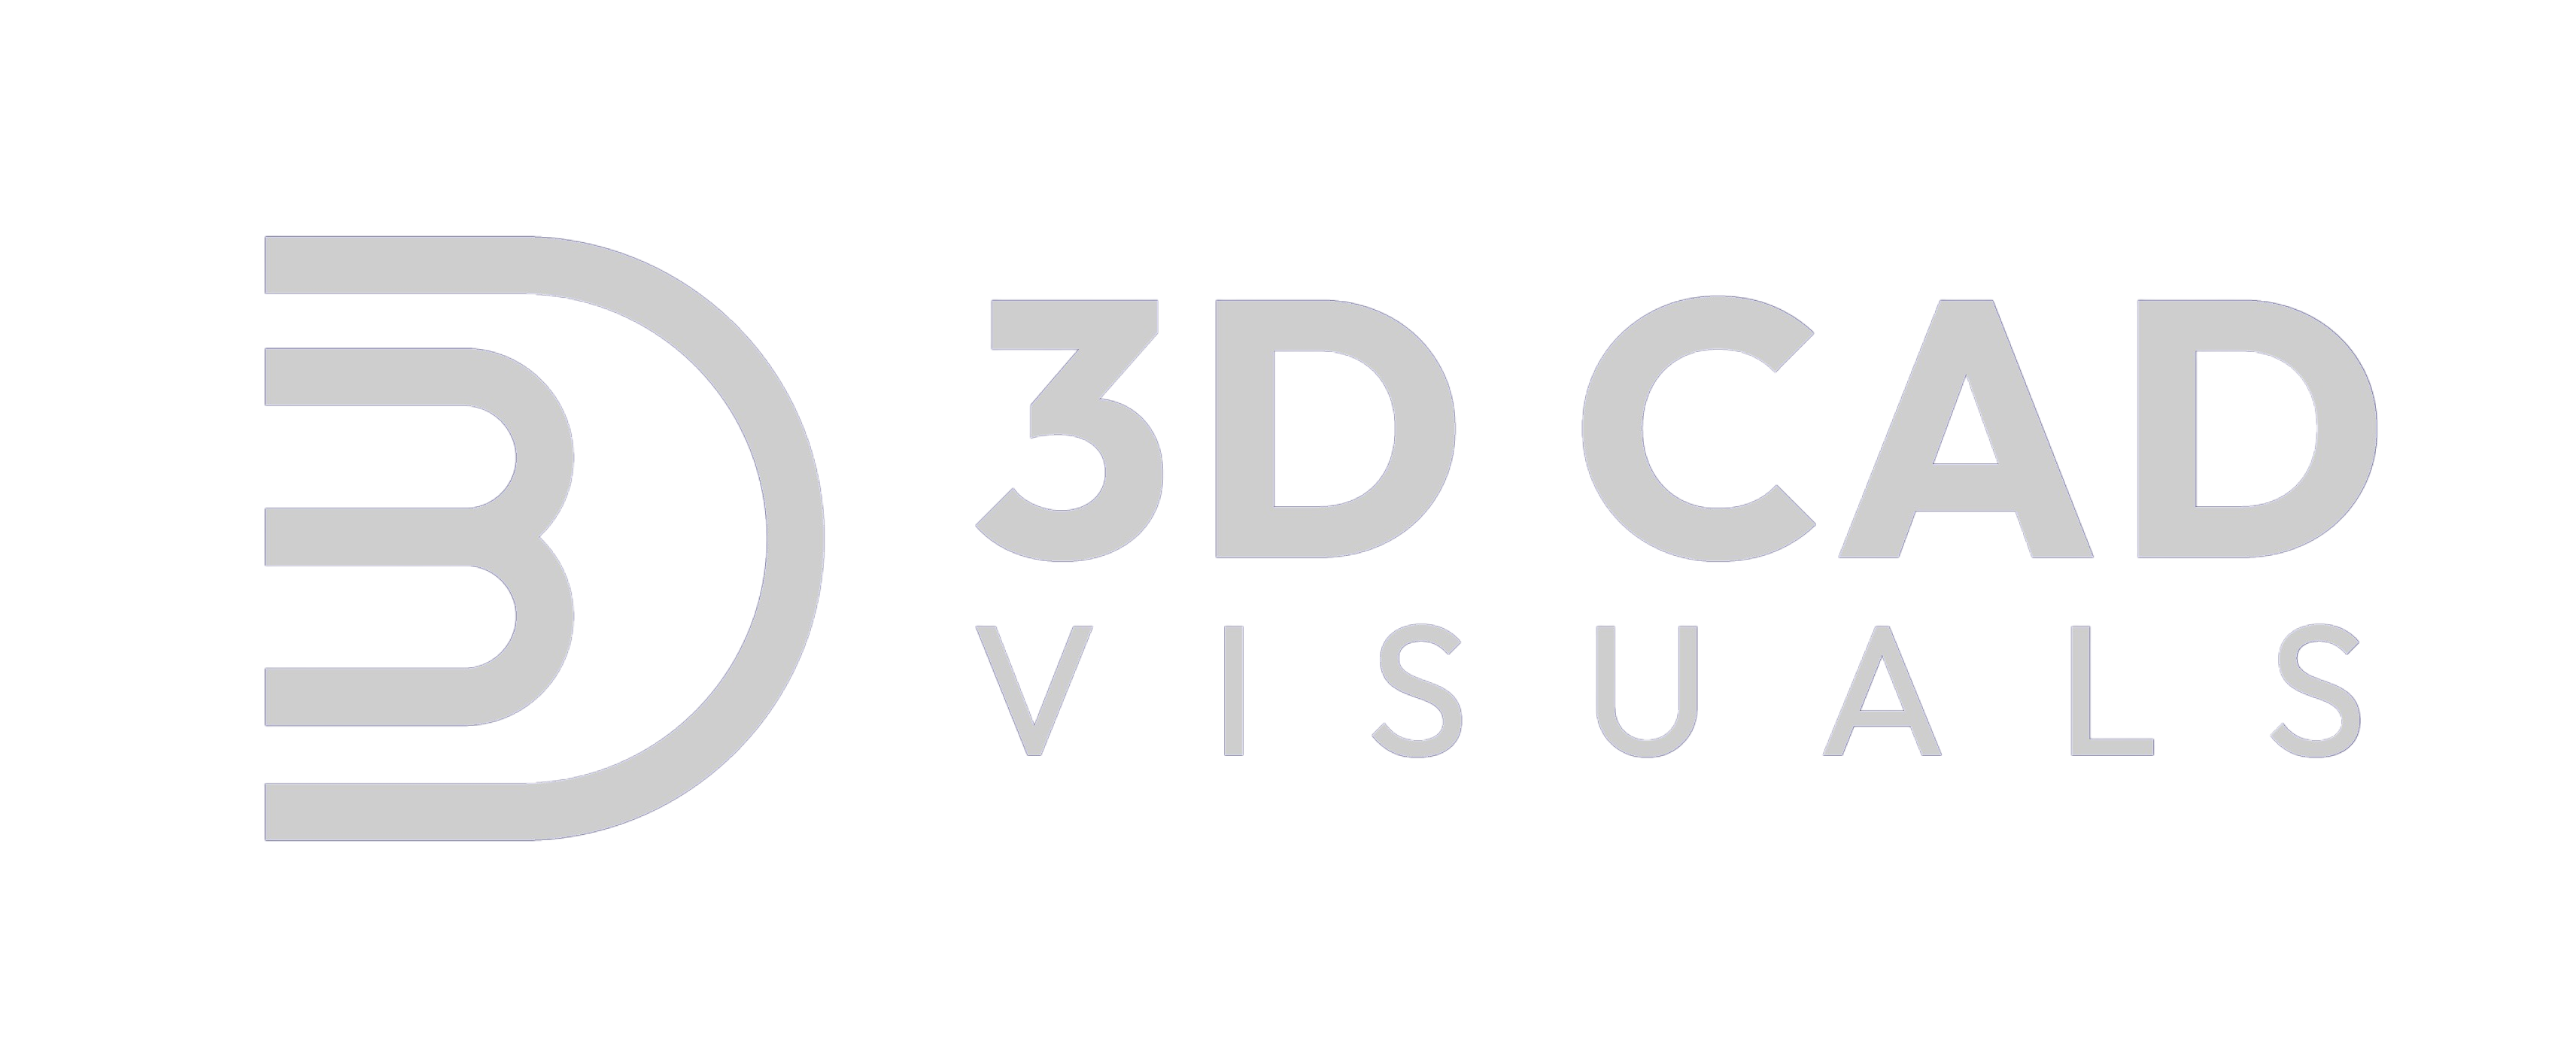 Immersive 360 VR CAD Visuals | 3D Visualization Services